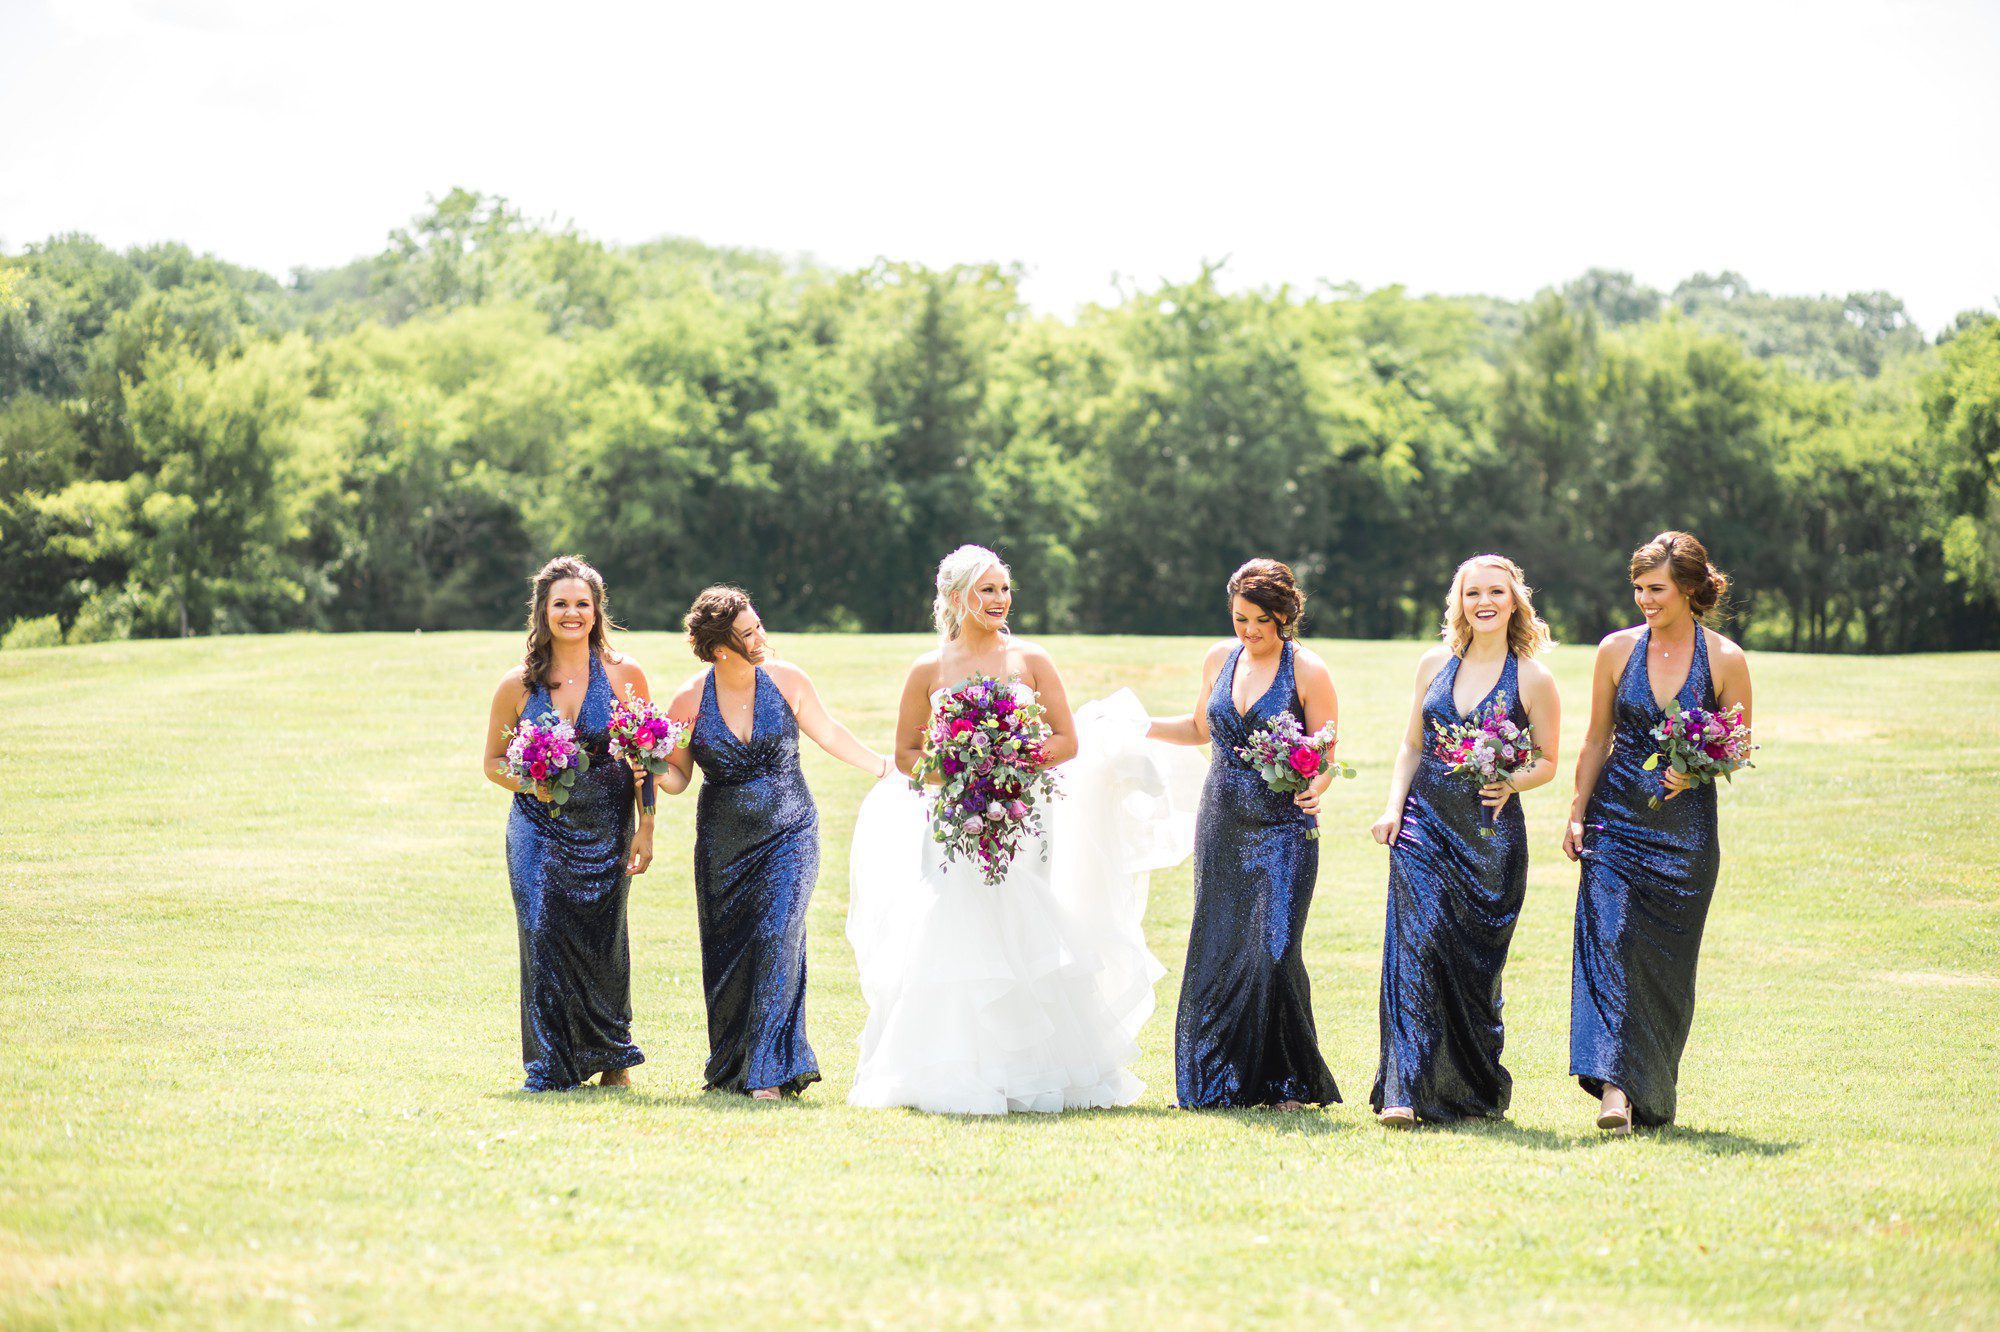 Christina Wu bridesmaids for navy bridal party in field